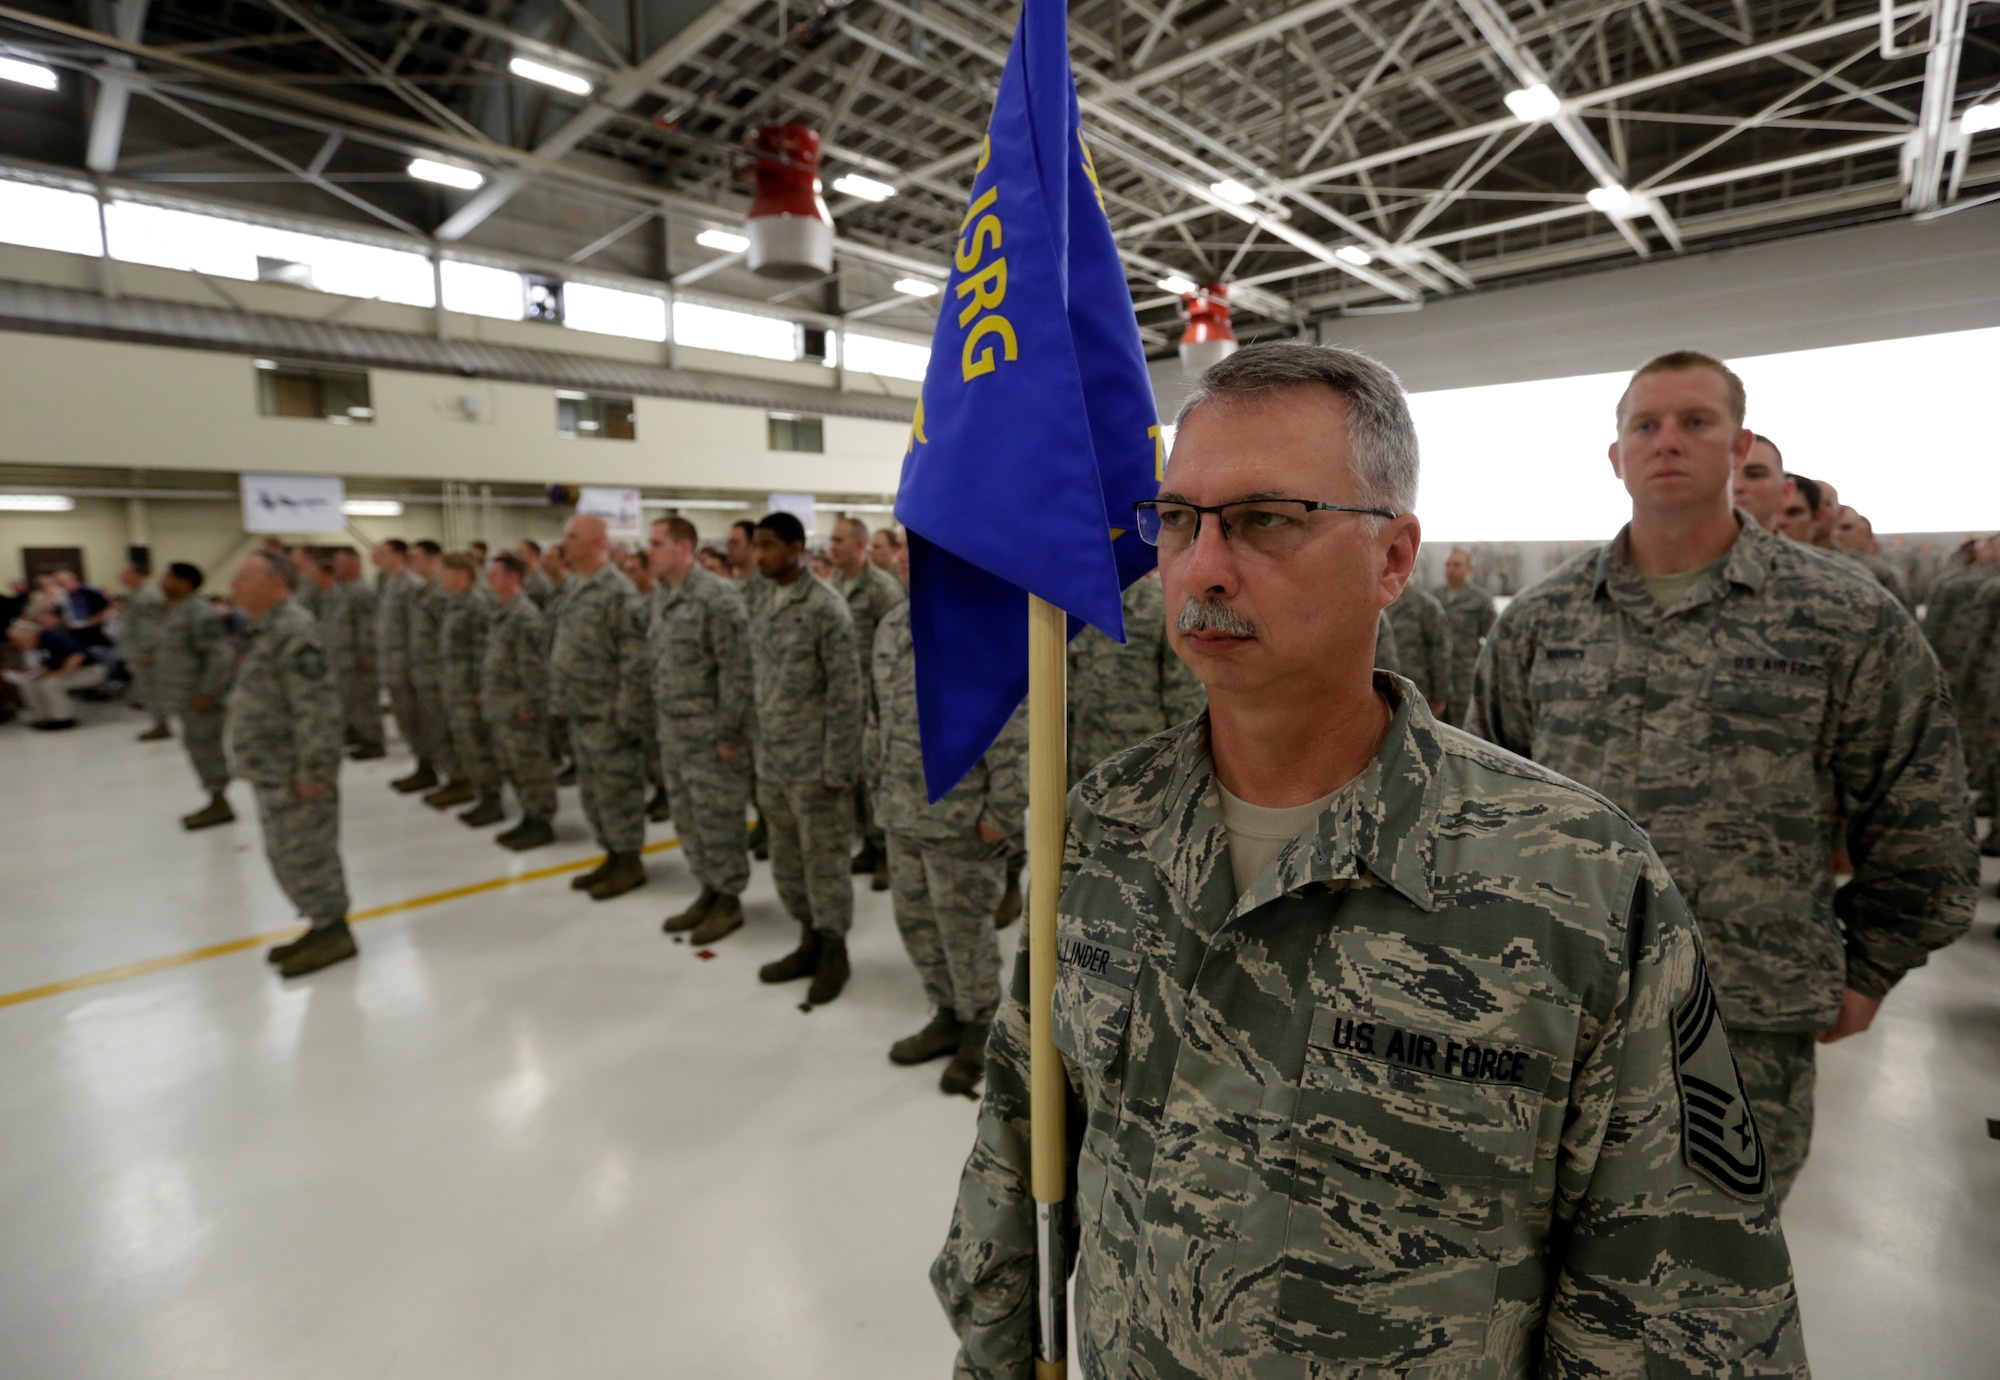 Chief Master Sgt. Tomie Allinder of the 123rd Intelligence Squadron stands in formation with his Airmen during the 188th Wing’s Conversion Day ceremony June 7, 2014, at Ebbing Air National Guard Base, Fort Smith, Arkansas. The 123rd, formerly a geographically separated unit with the Arkansas Air National Guard located at Little Rock Air Force Base, Arkansas, now falls under the 188th Intelligence, Surveillance and Reconnaissance Group of the newly redesignated 188th Wing. The 123rd, comprised of 120 Airmen, will physically move its operation to the 188th over the next two years as part of the 188th’s mission conversion from A-10C Thunderbolt II “Warthogs” to ISR and remotely piloted aircraft. (U.S. Air National Guard photo by Master Sgt. Mark Moore/released)